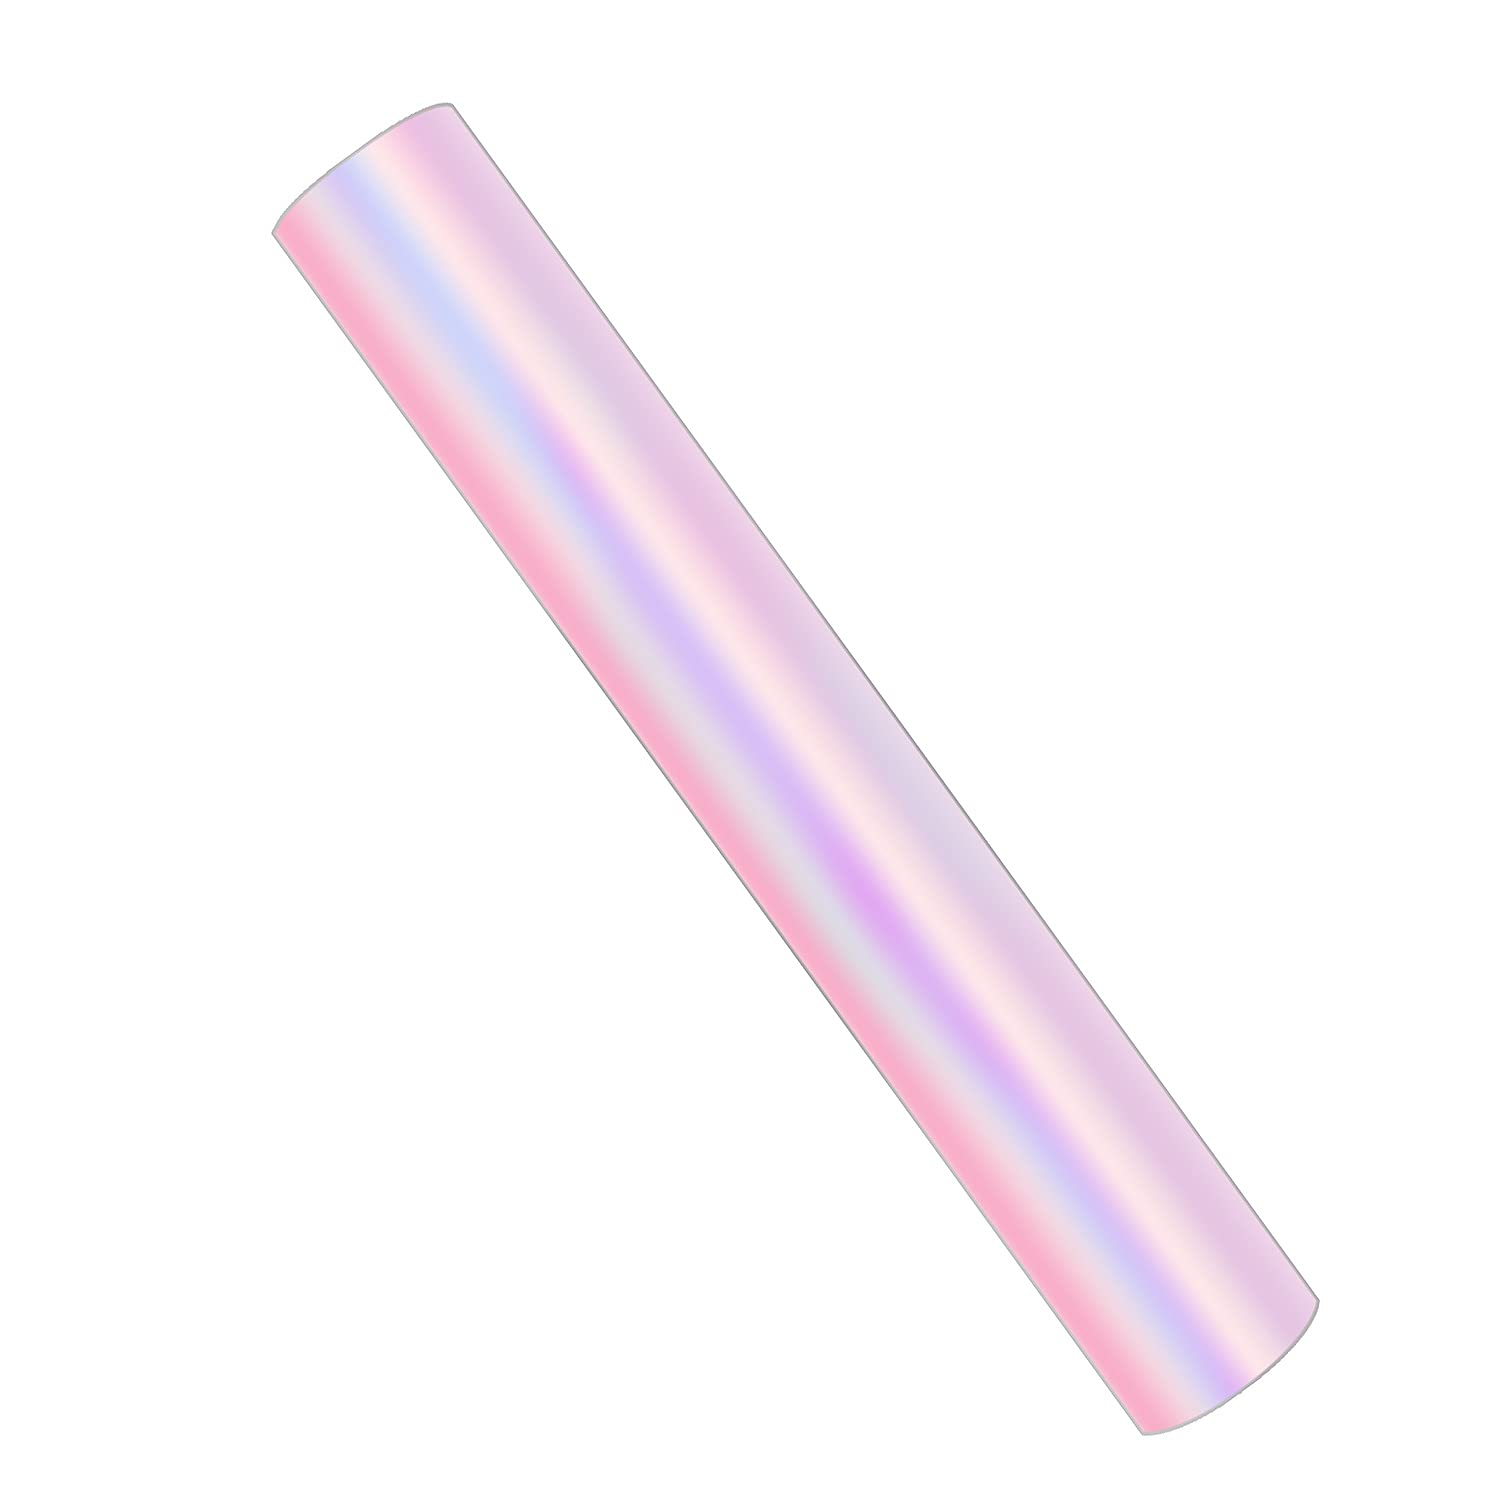 MAOUYWIEE 1 Roll Iridescent Cellophane Roll Iridescent Wrapping